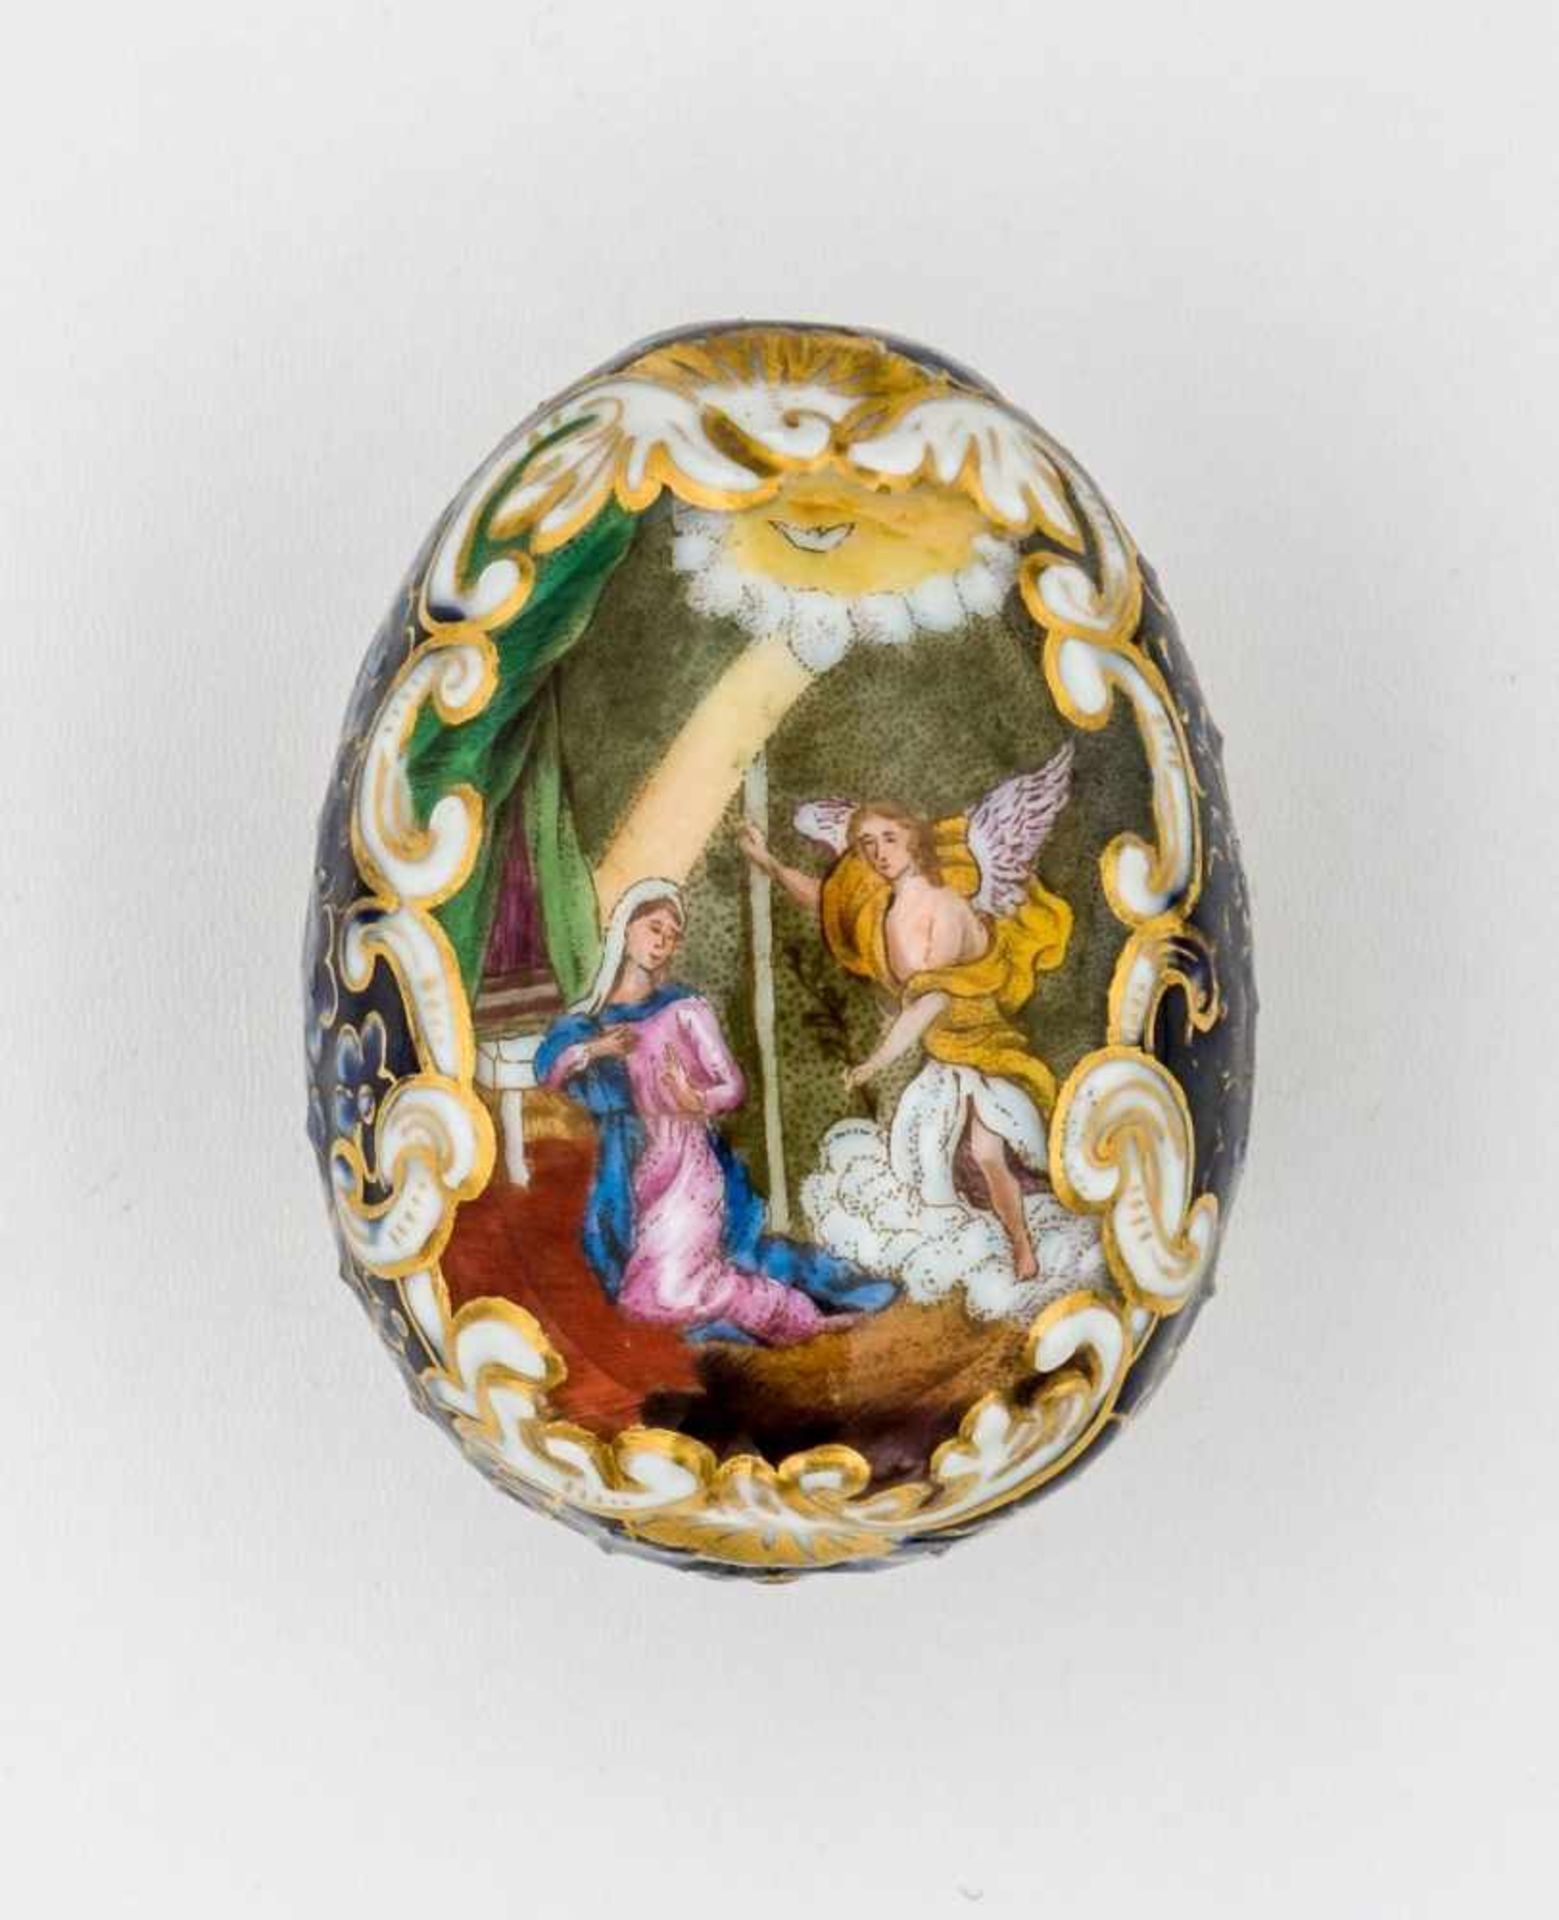 A Porcelain Easter egg with relief-like structure and depiction of the Annunciation andJesus crowned